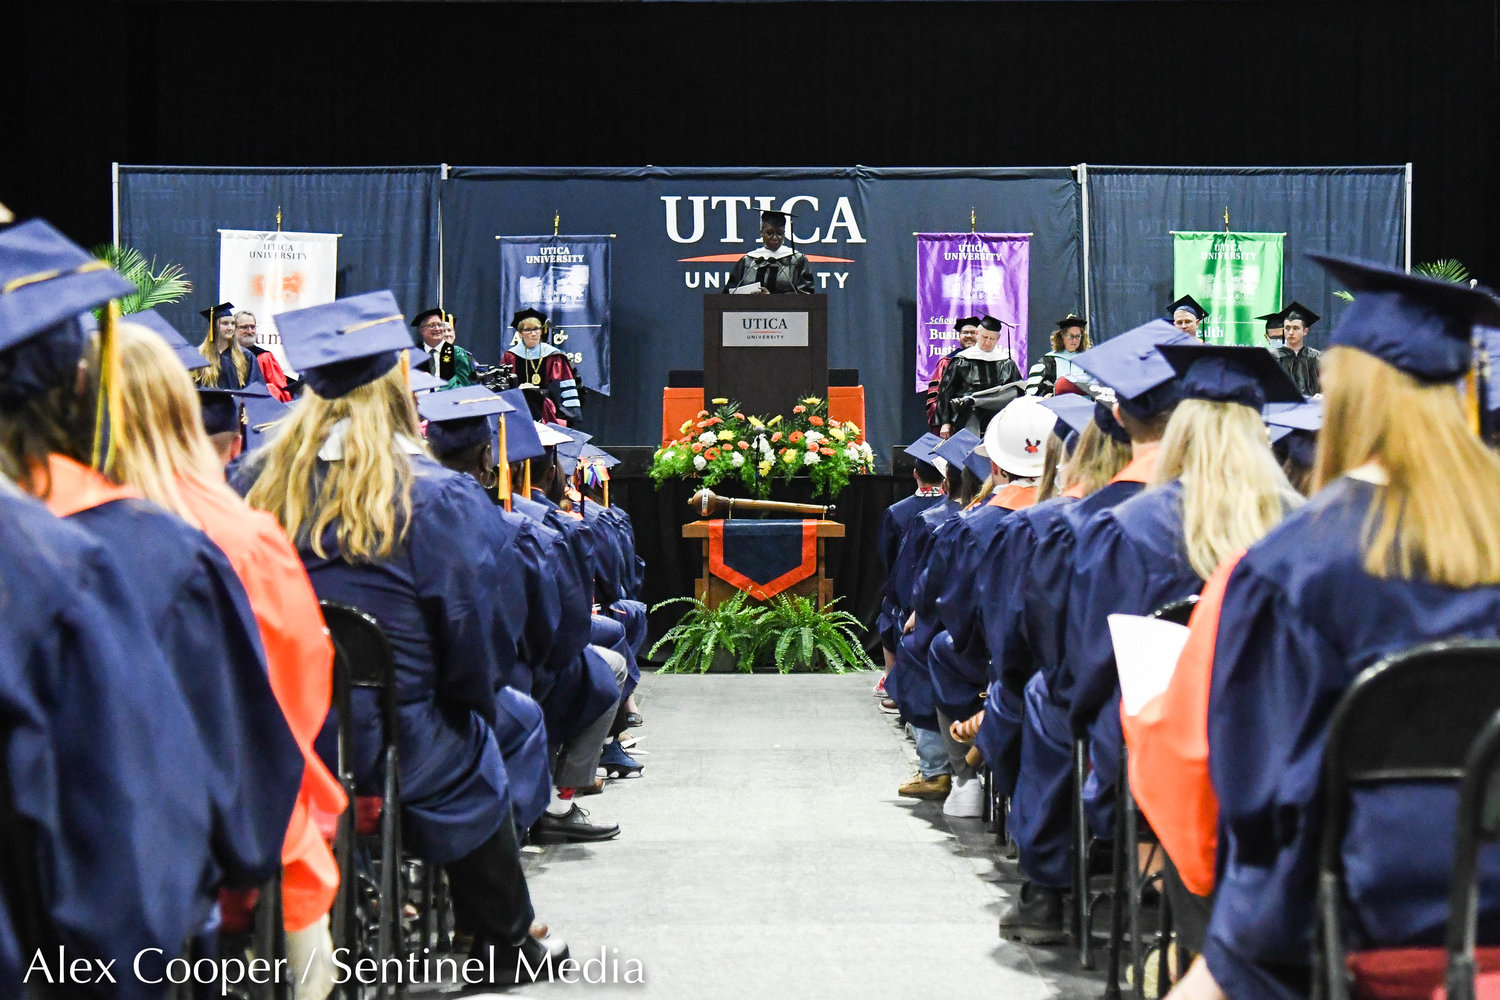 Justice Janet Malone, a 1986 graduate of Utica University, speaks during the school's commencement ceremony on Thursday at the Adirondack Bank Center at the Utica Memorial Auditorium.